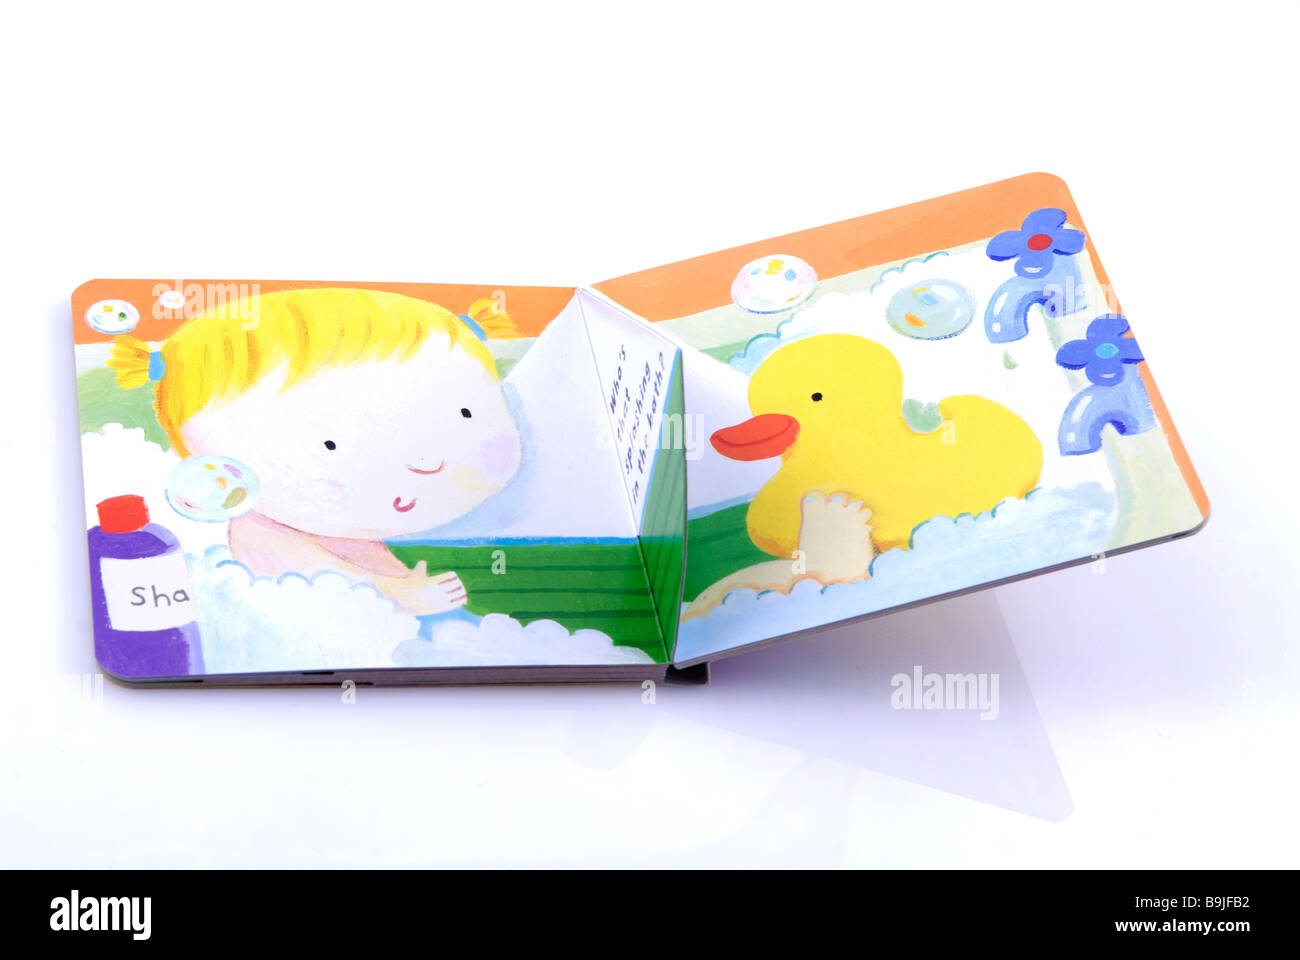 Children's story book against a white background Stock Photo